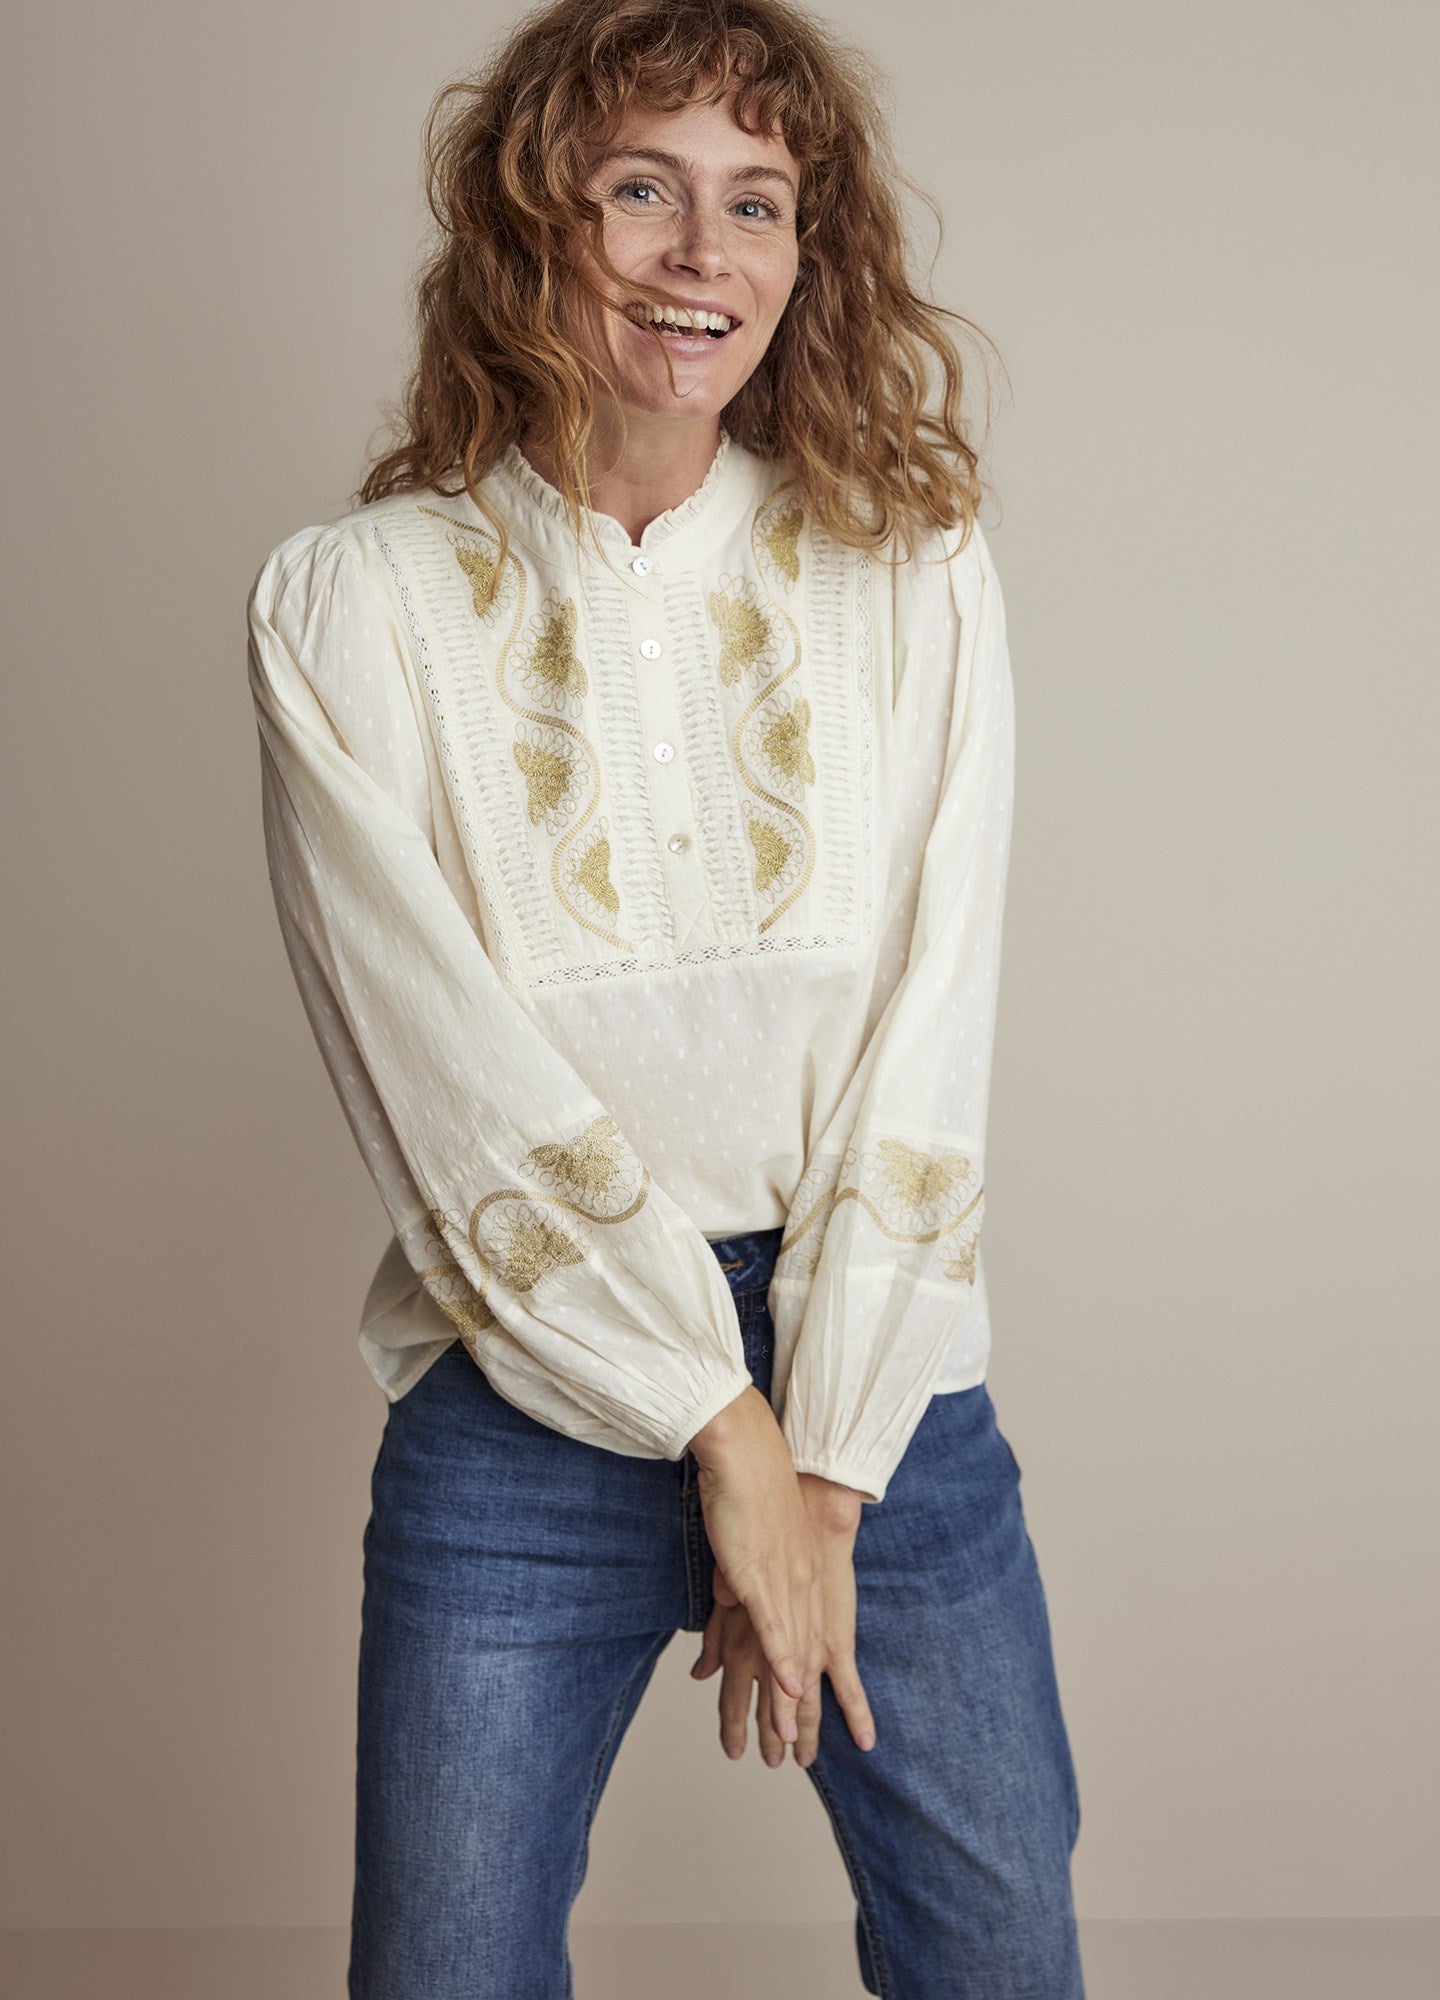 Blouse with gold-coloured thread detail